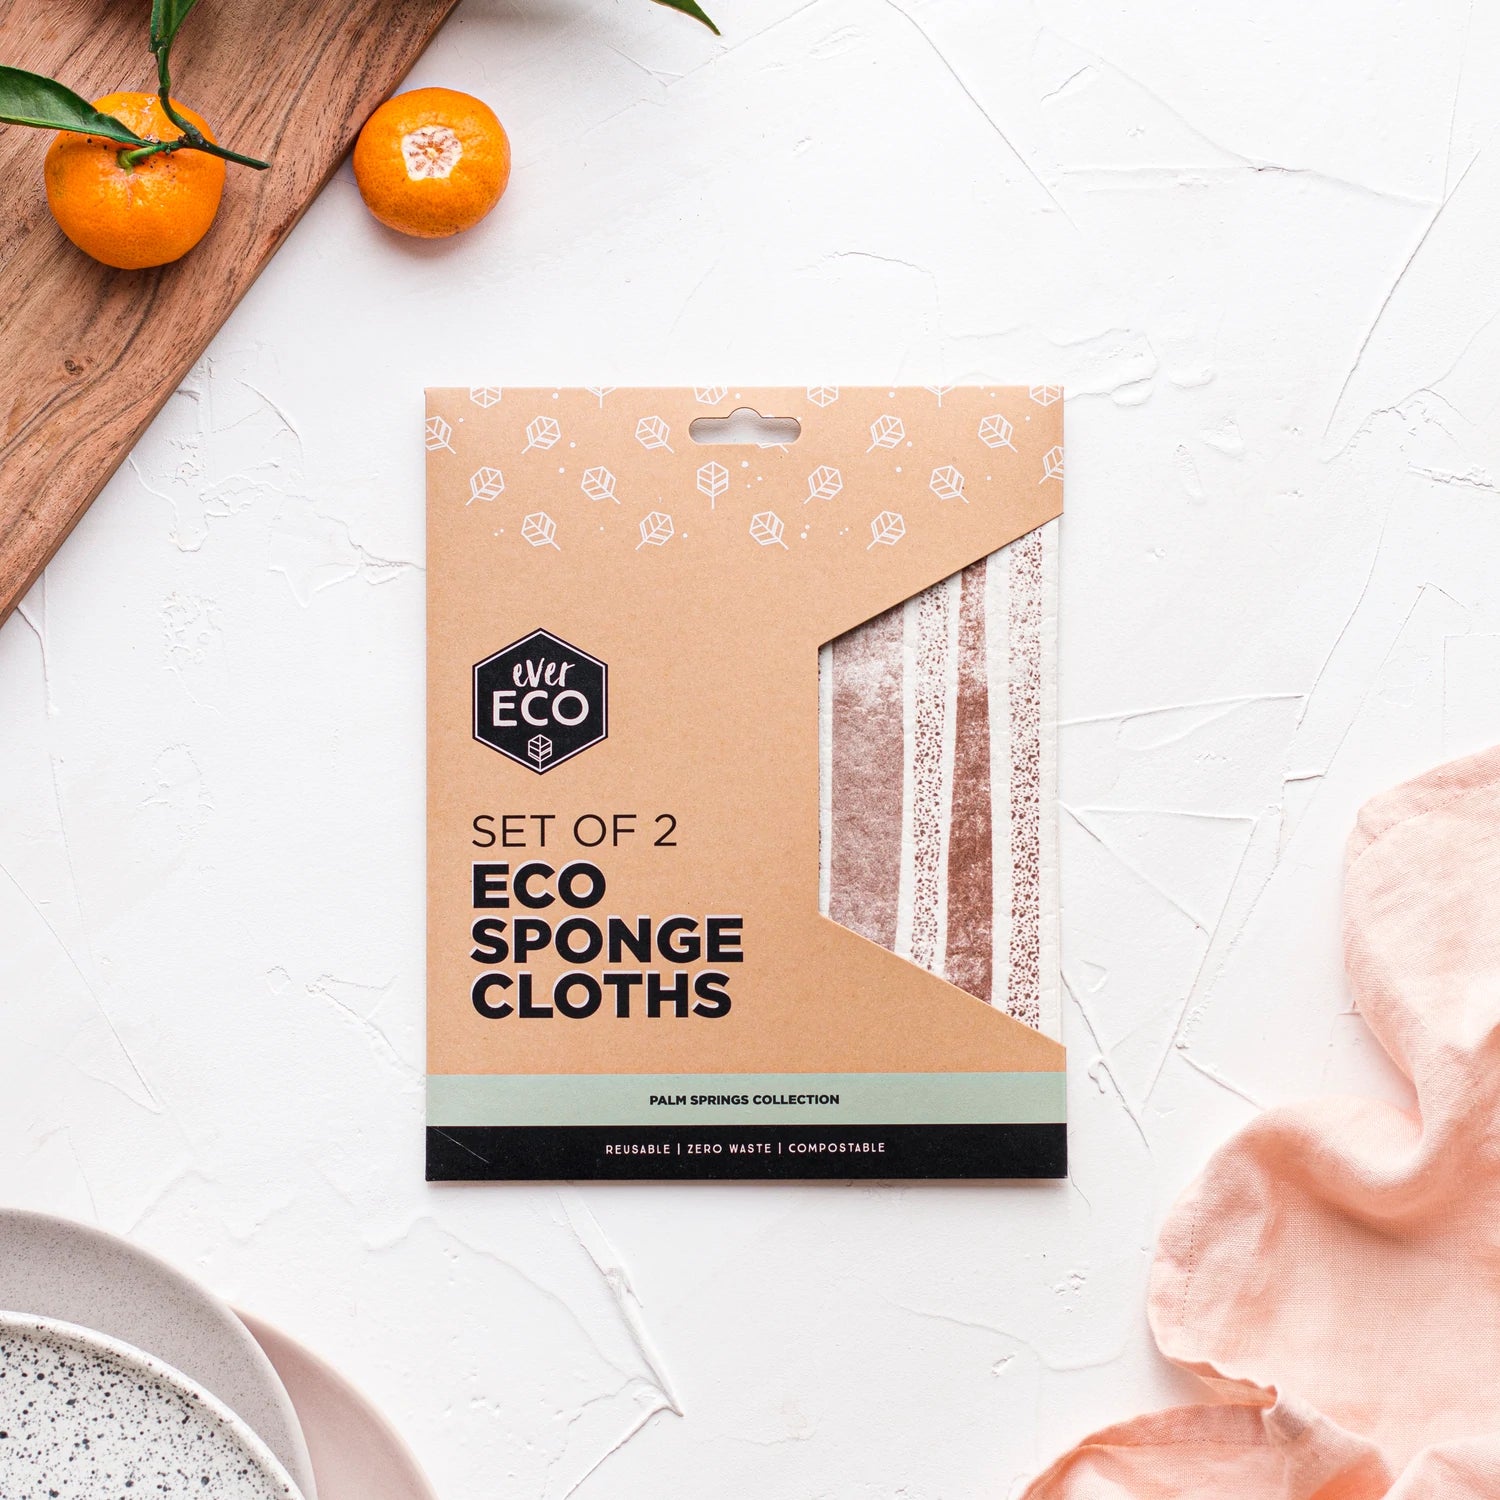 Eco Sponge Cloths (Set of 2) - Available in 3 Styles